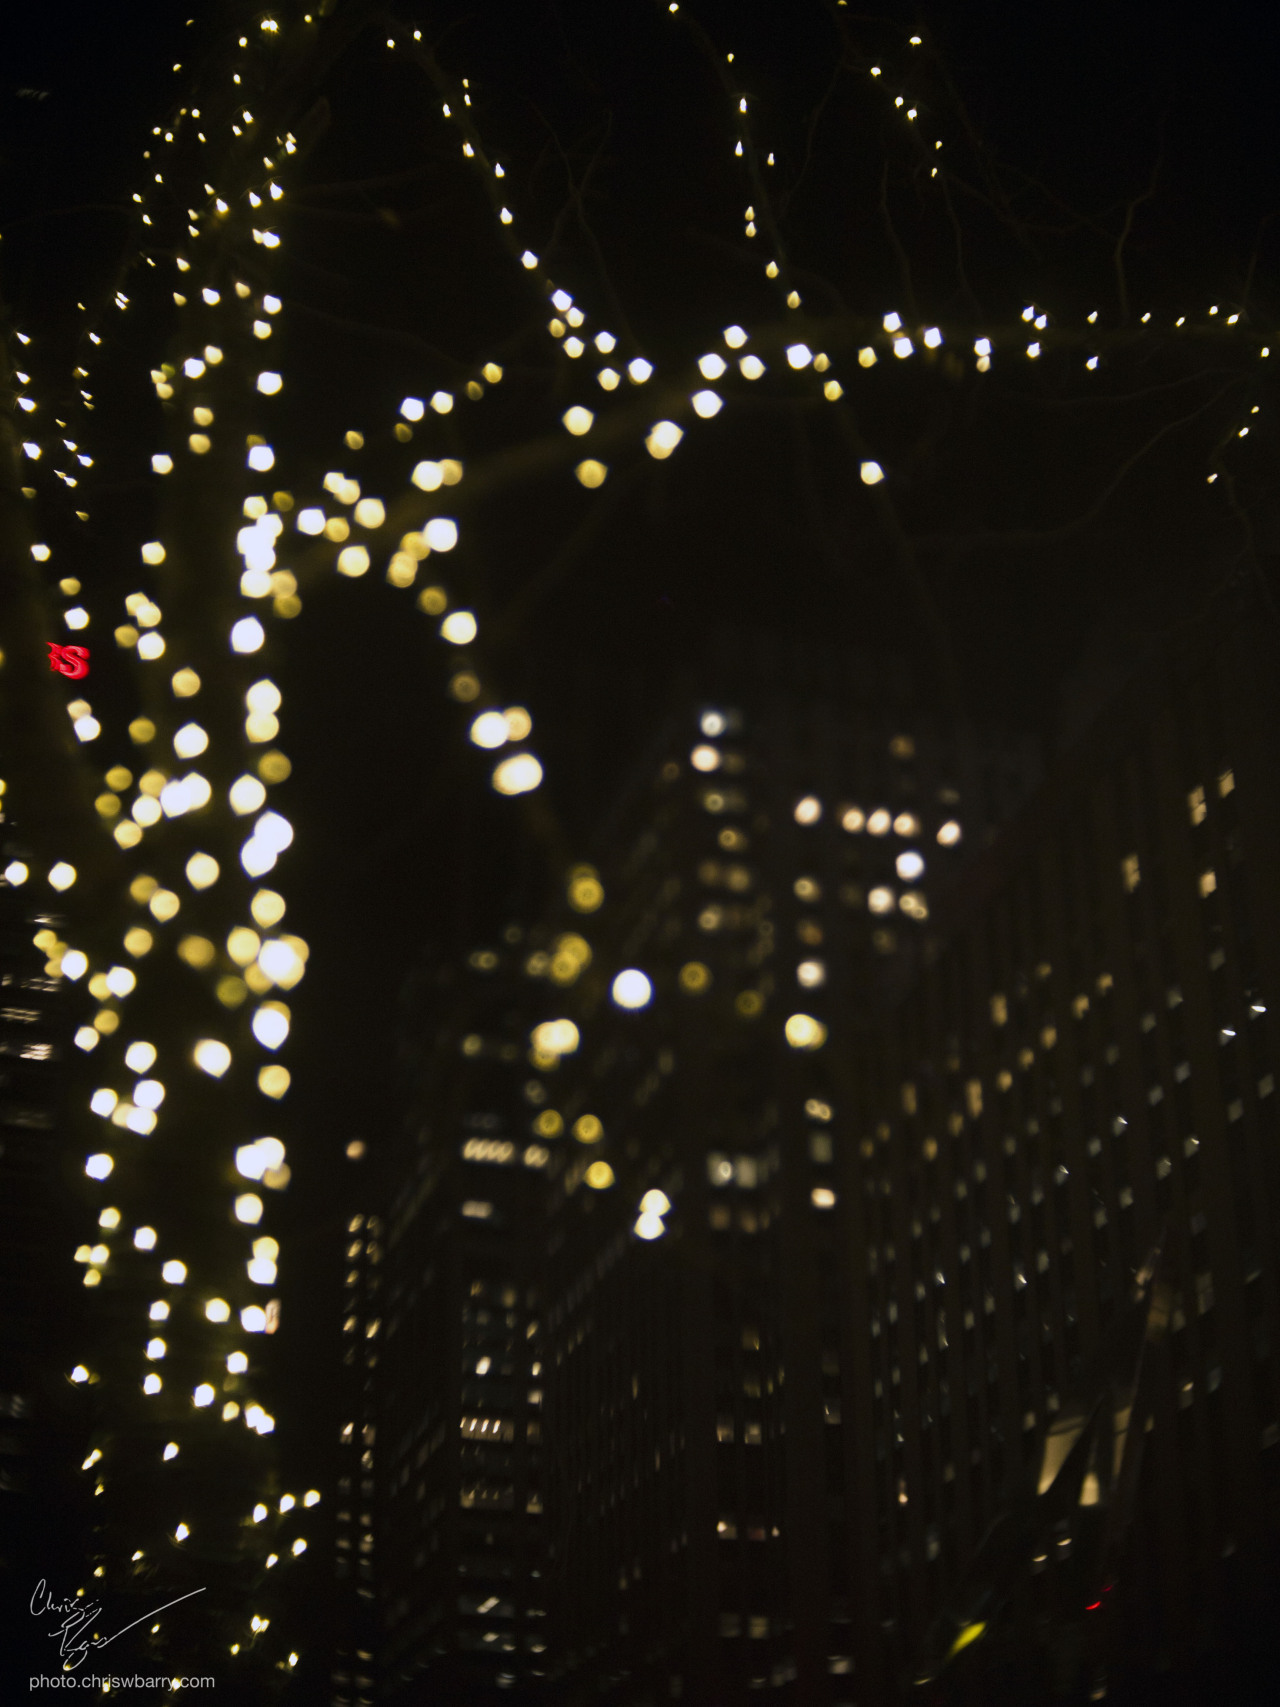 And one more New York bokeh